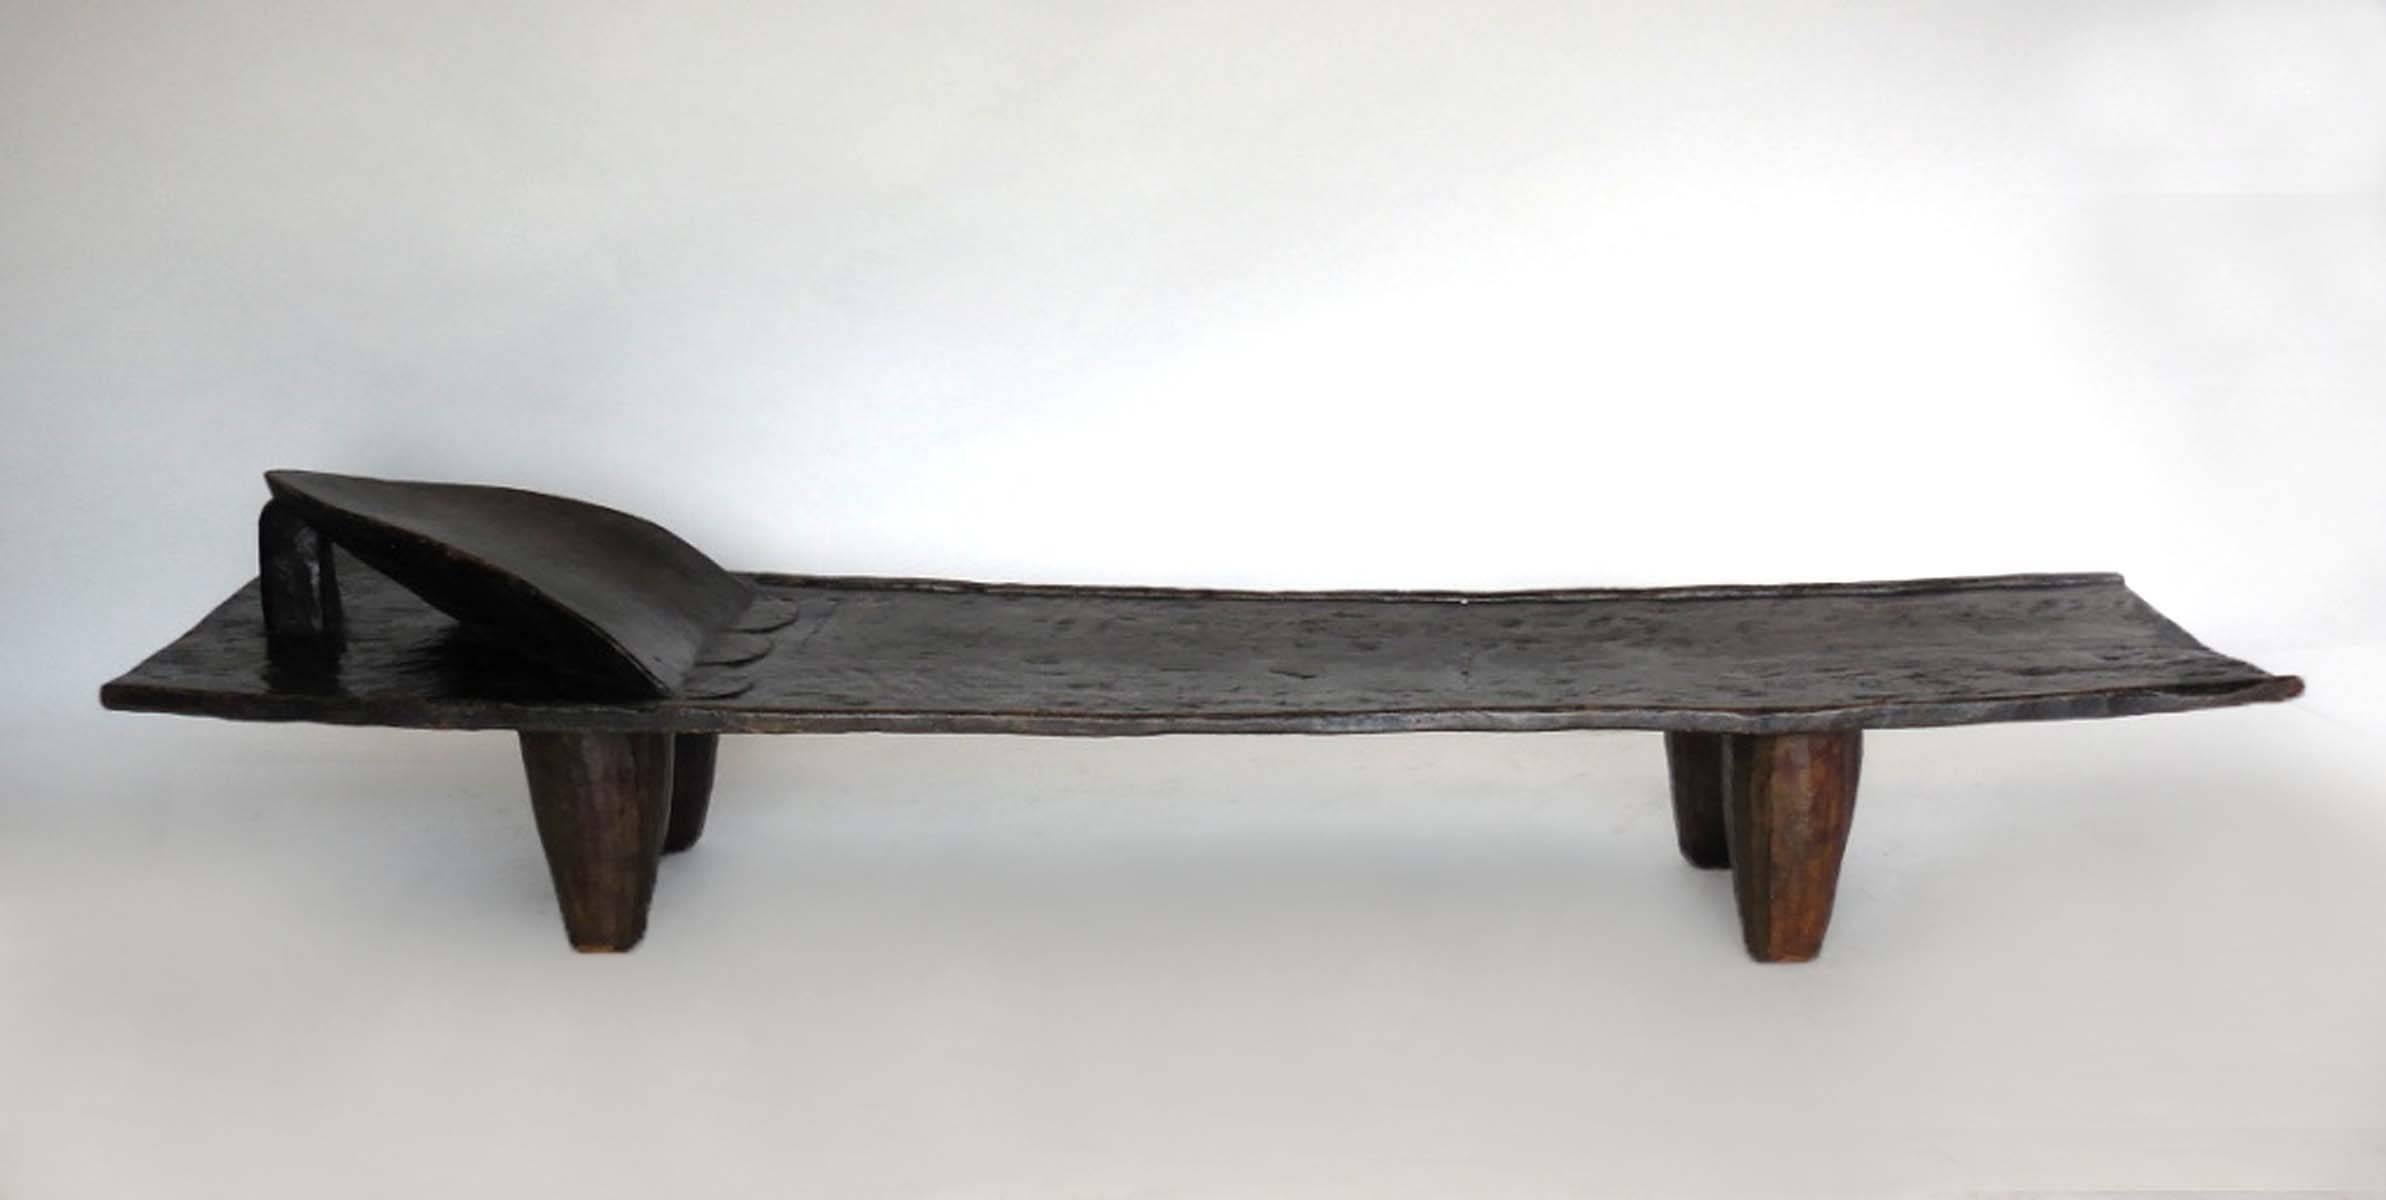 Antique wooden tribal bed carved out of one piece of wood. Conical legs, headrest and carved detail on top. Beautiful, worn wood, lovely dark patina. Senufo tribe, Mali.
Measures 21 to 23.5 inches deep and seat measures 12.5.